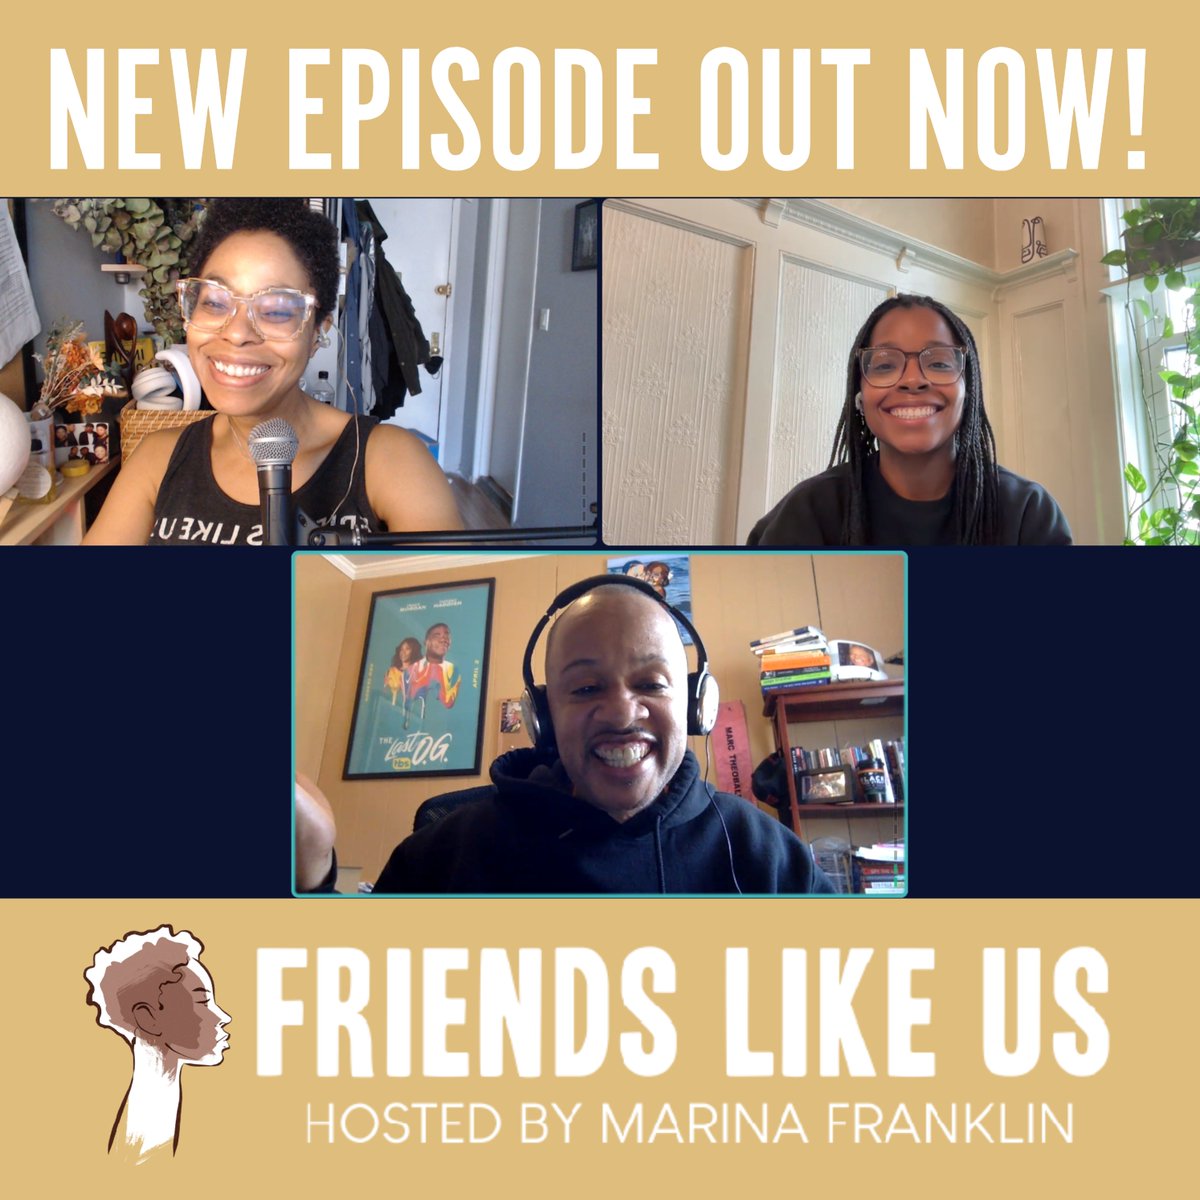 NEW EPISODE ALERT! We're joined by amazing guests @PeaNation @marctheo and wonderful host @marinayfranklin. We're talking about breaking barriers and making history in our new episode. #ListenNow here! ow.ly/AIxw50Jr4NV #FriendsLikeUS #DEI #InclusionMatters🎧